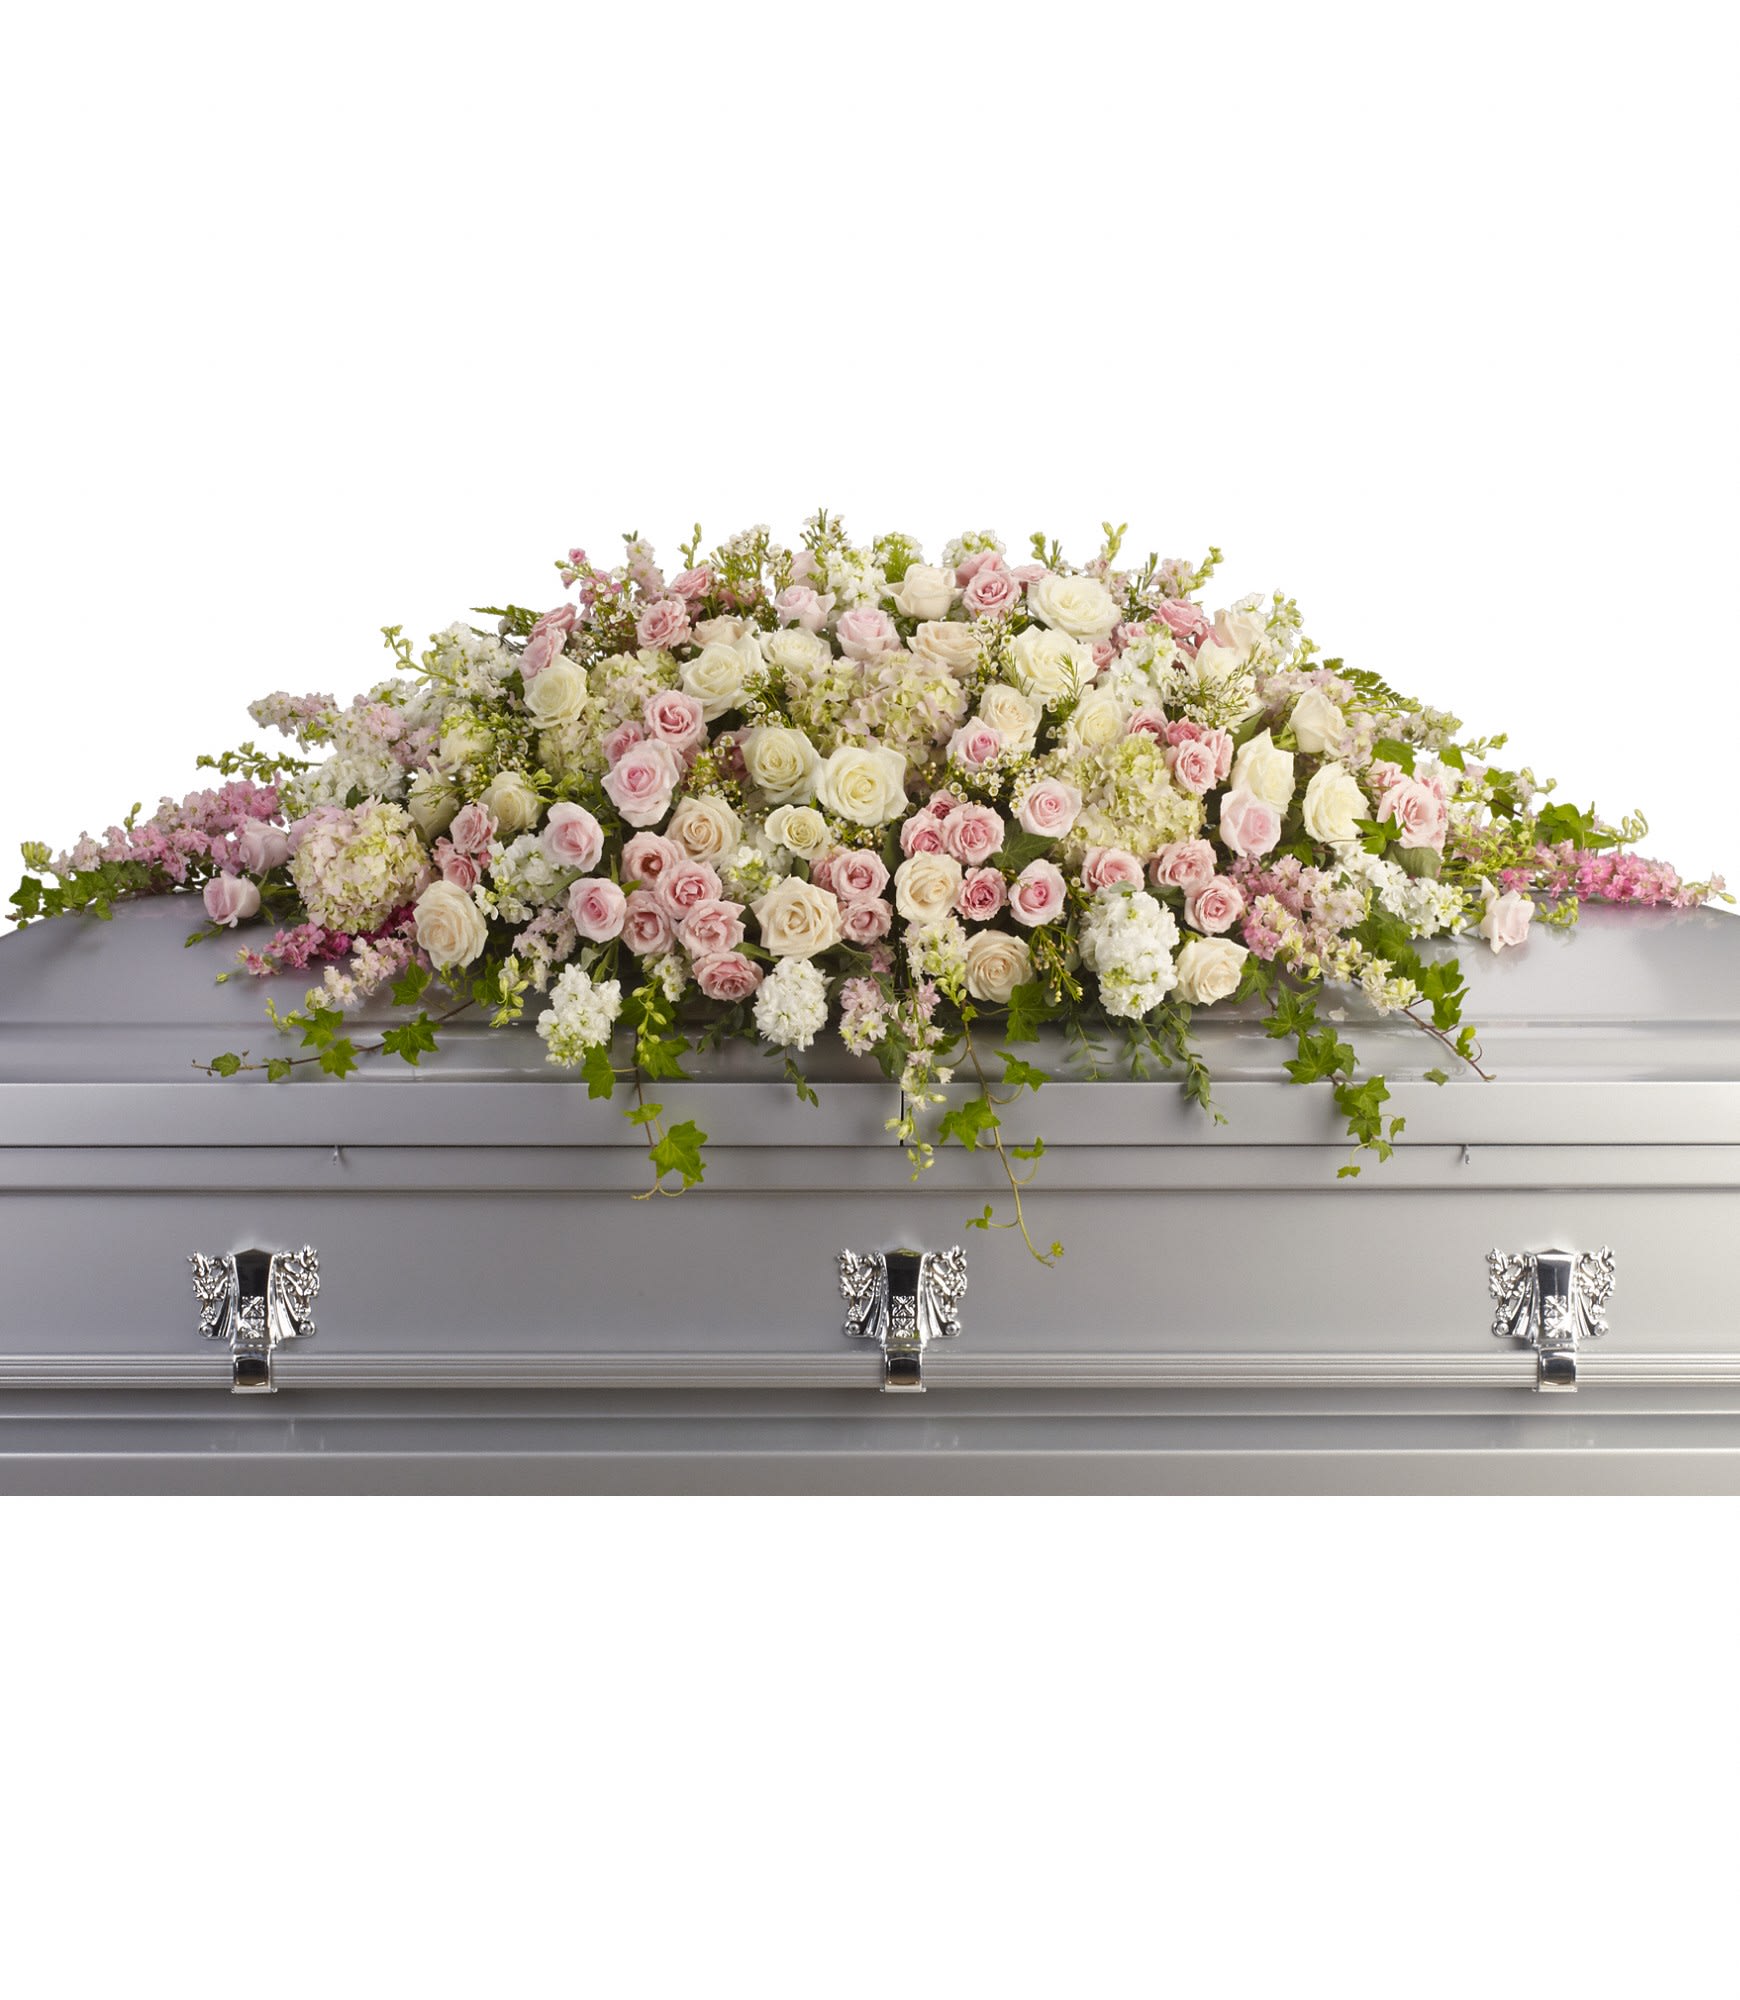 Always Adored Casket Spray - A beautiful spray of soft pink, white and crÃ¨me blooms ease the burden of loss. 